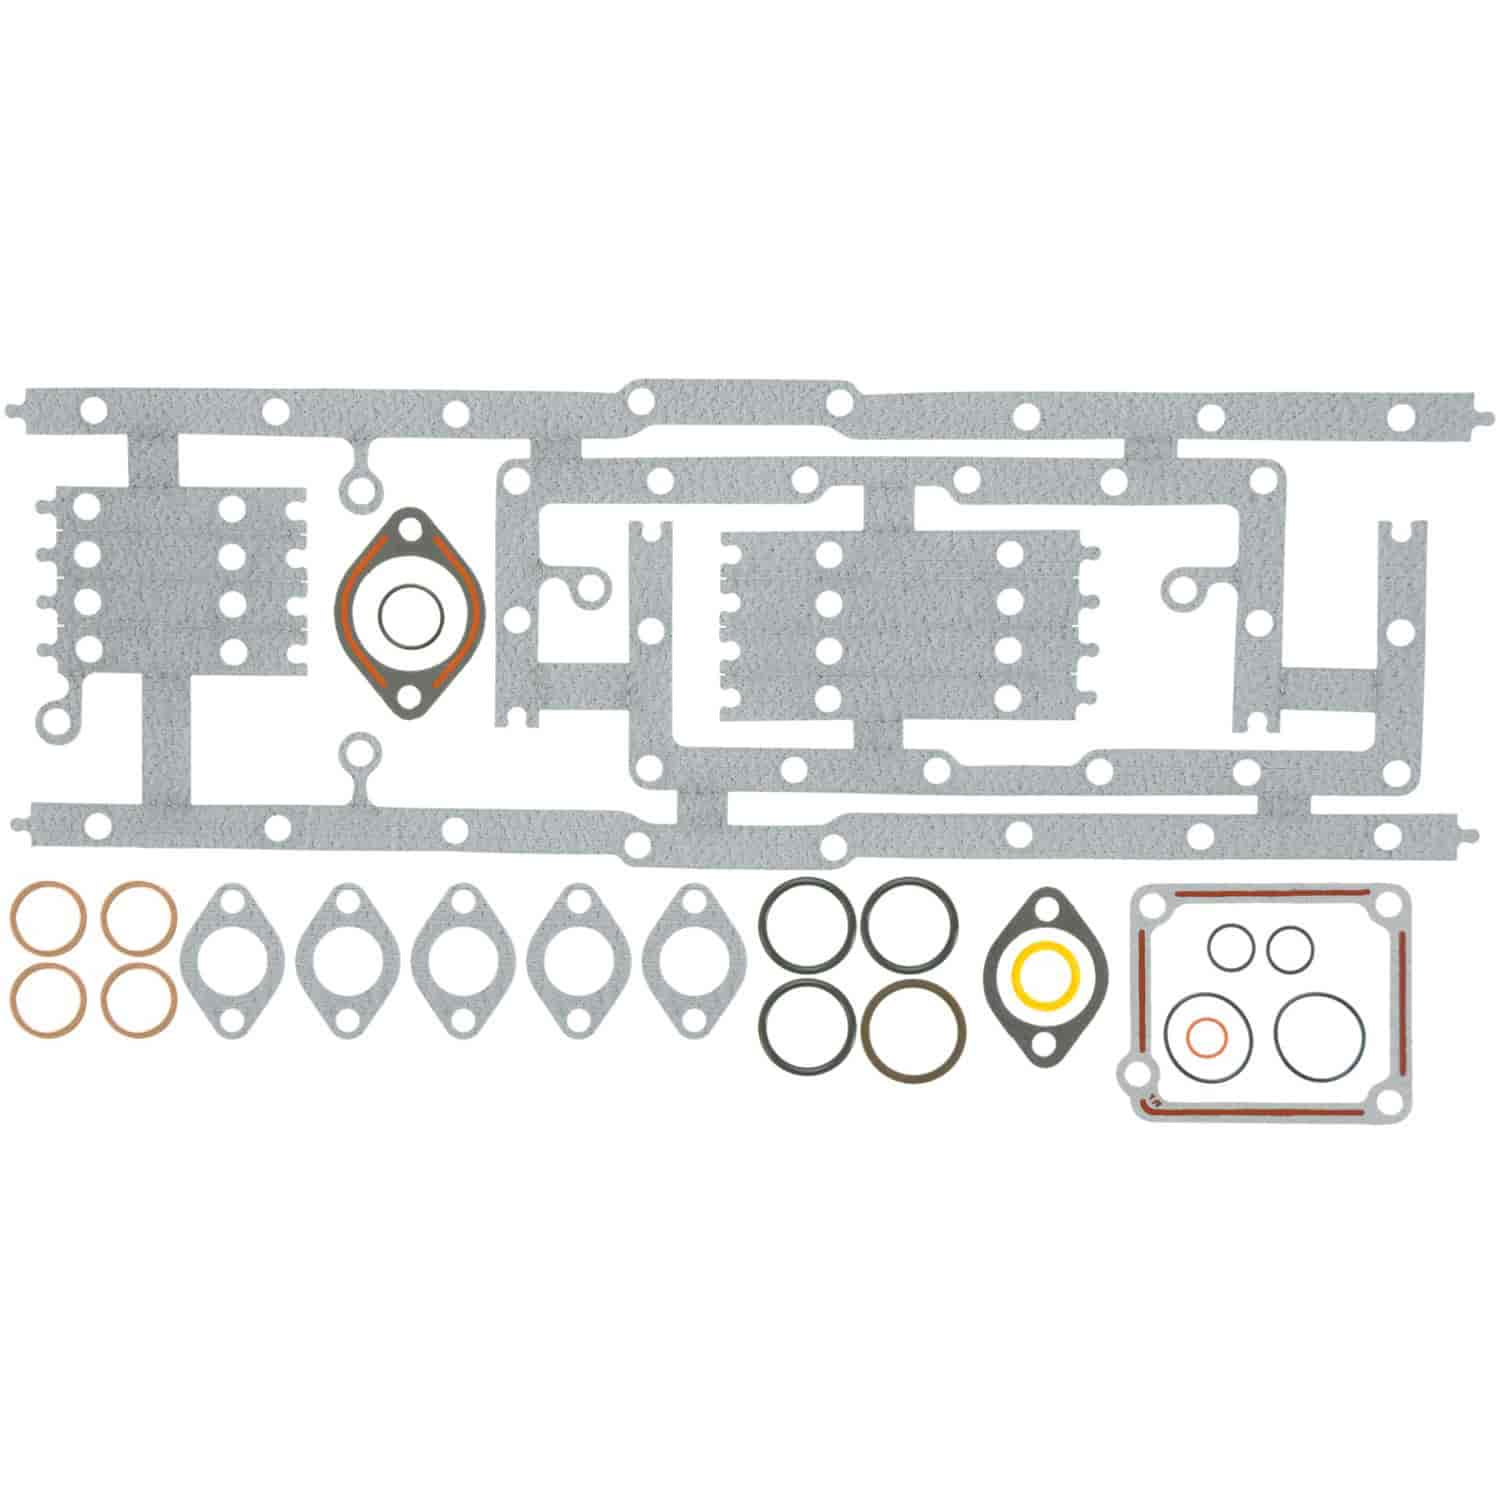 Lower Engine Gasket Set Cat 3406 Engine Series See Product Bulletin for Serial Number and Arrangeme